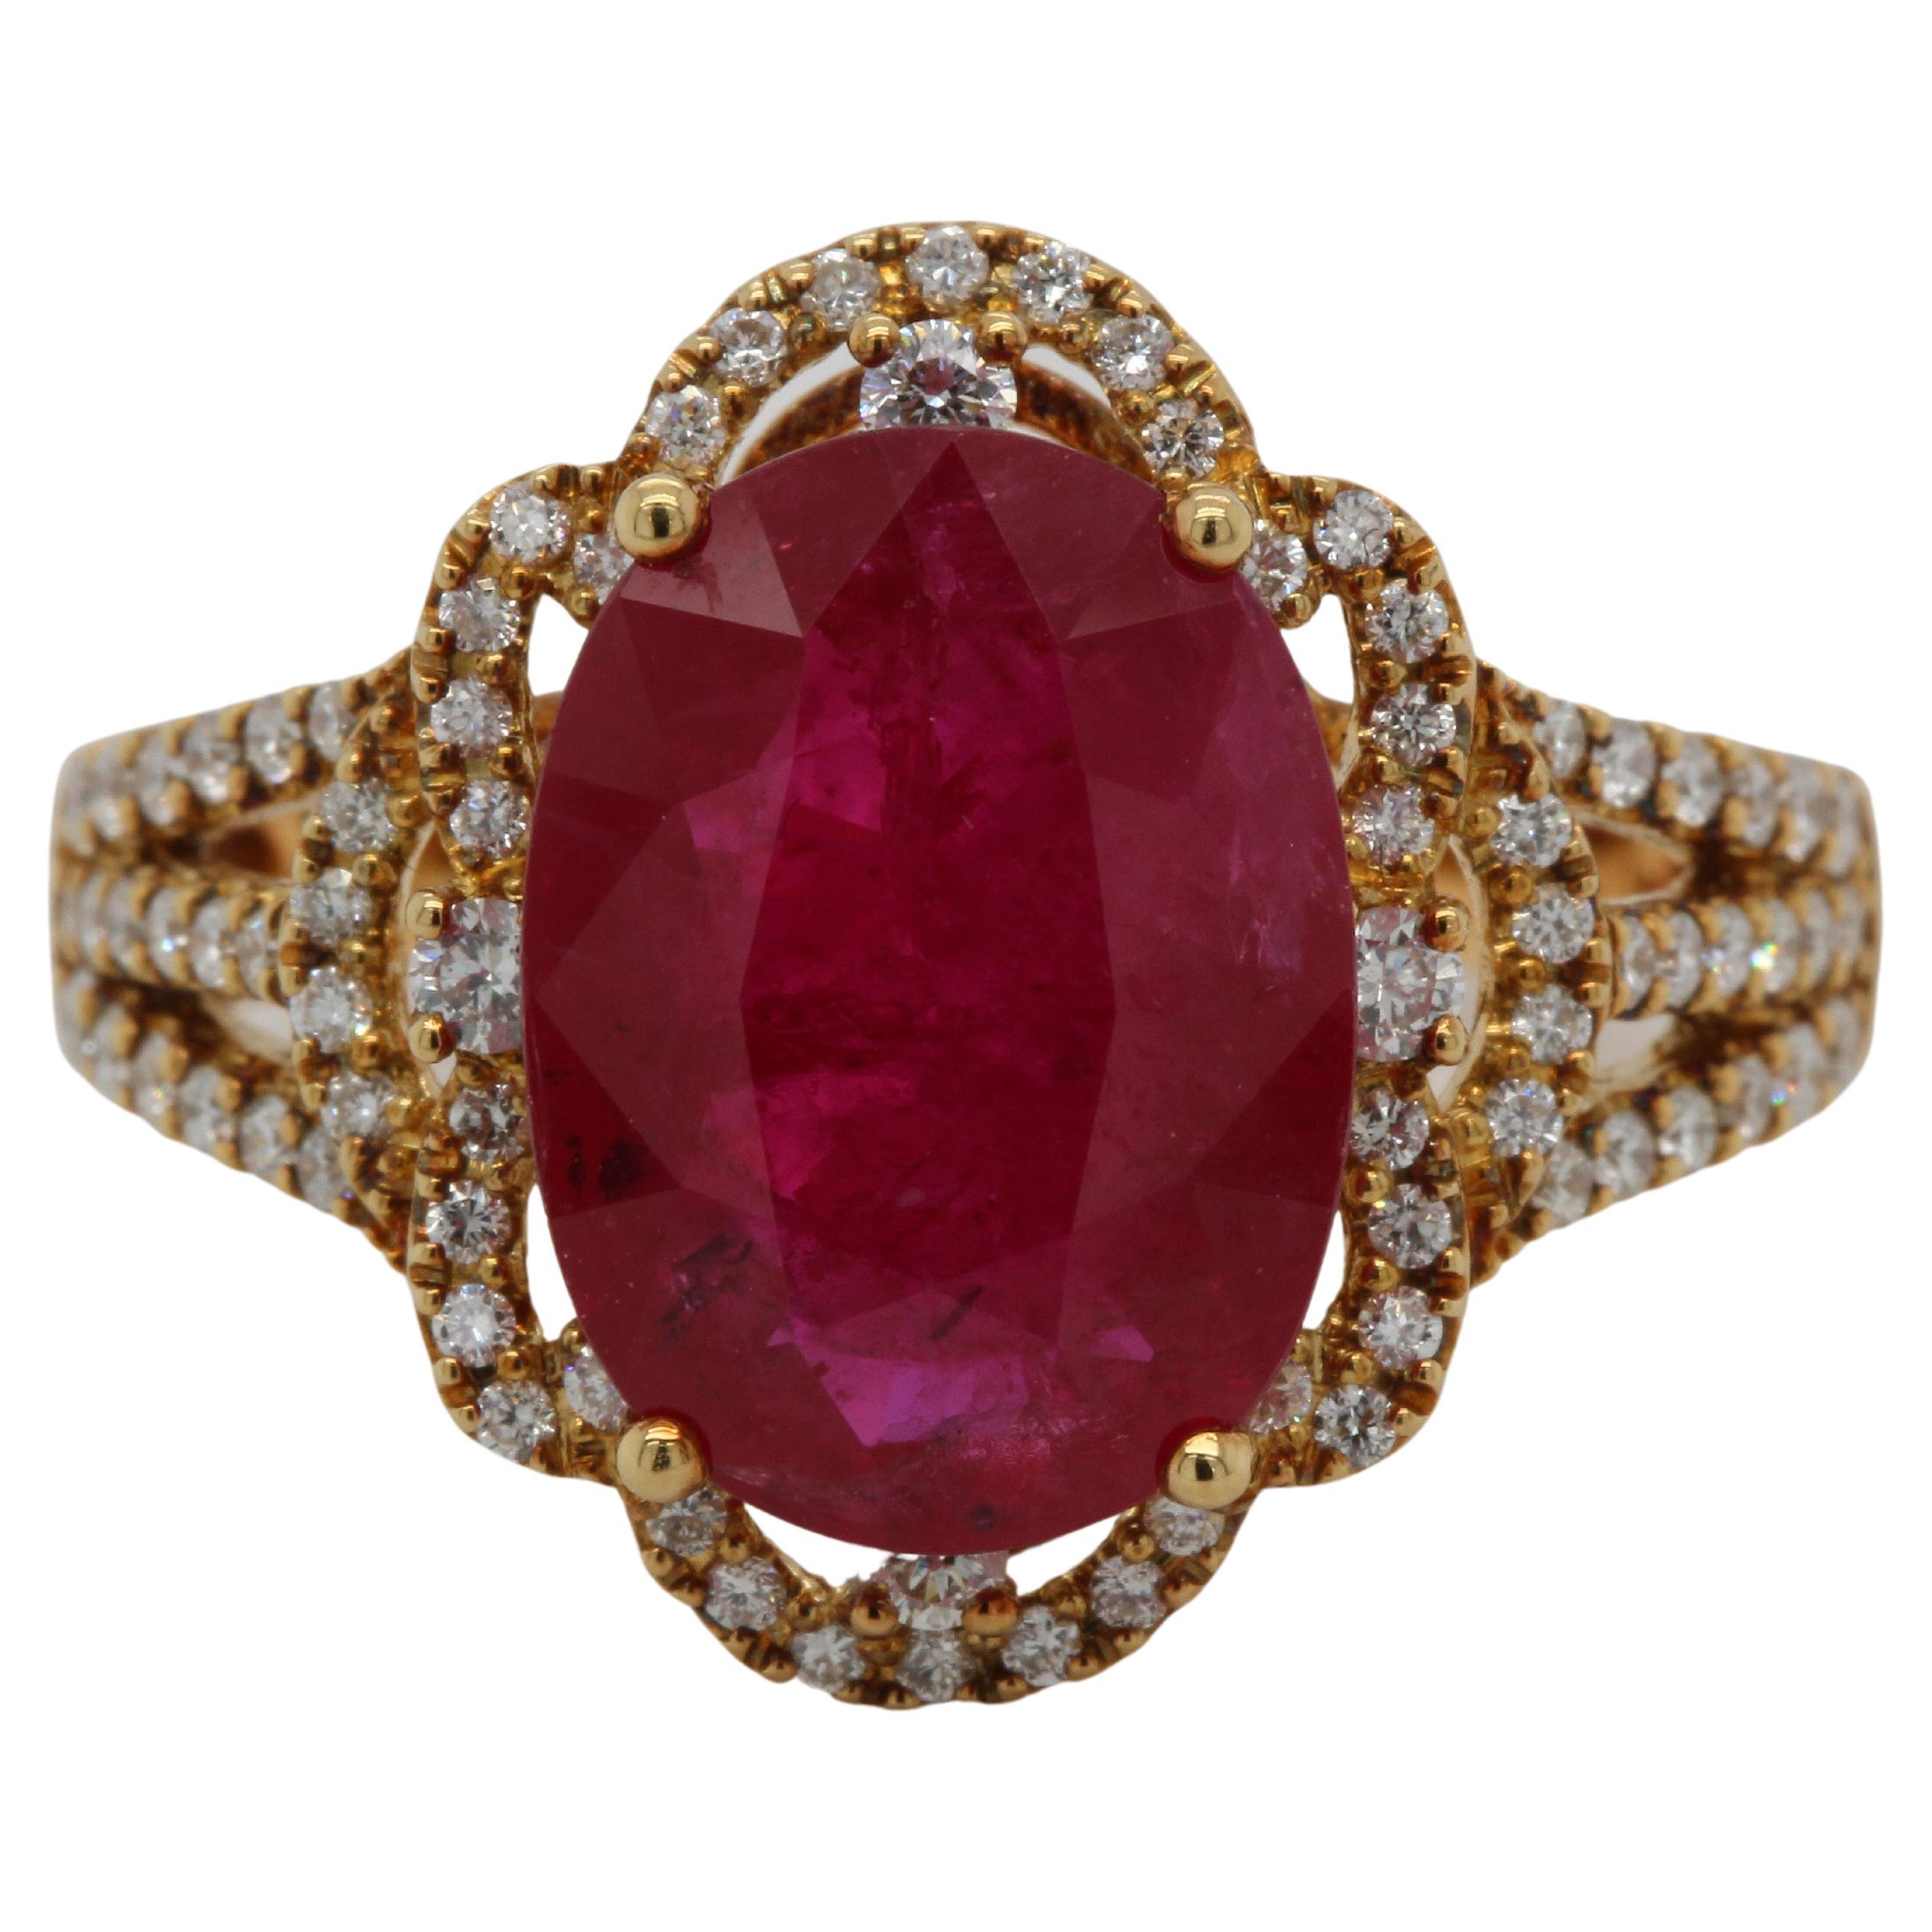 Our 5.19 carat oval ruby ring is a stunning masterpiece of elegance and simplicity. It showcases a single oval cut natural untreated ruby of the finest quality, set with 0.49 carats of white round diamonds. This exclusive ruby and diamond ring was